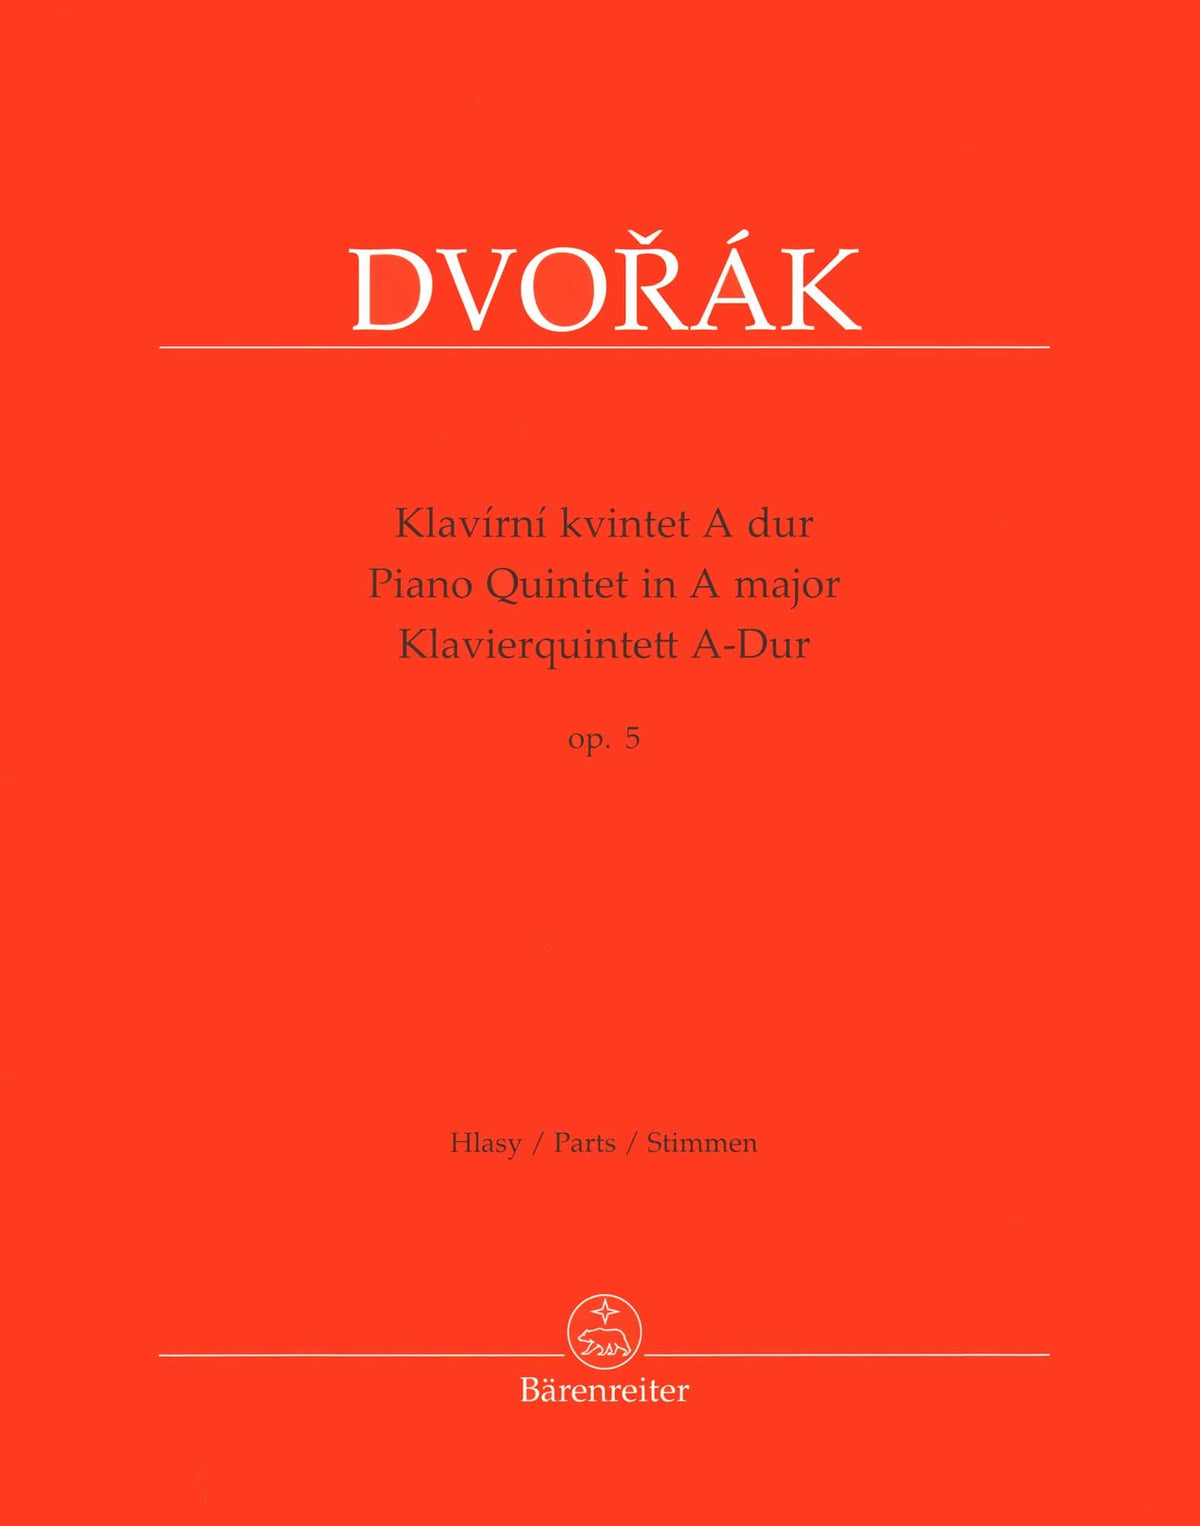 Dvorak, Antonin - Piano Quintet in A major, op. 5 - for Two Violins, Viola, Cello, and Piano - edited by Burghauser and Solc - Barenreiter URTEXT